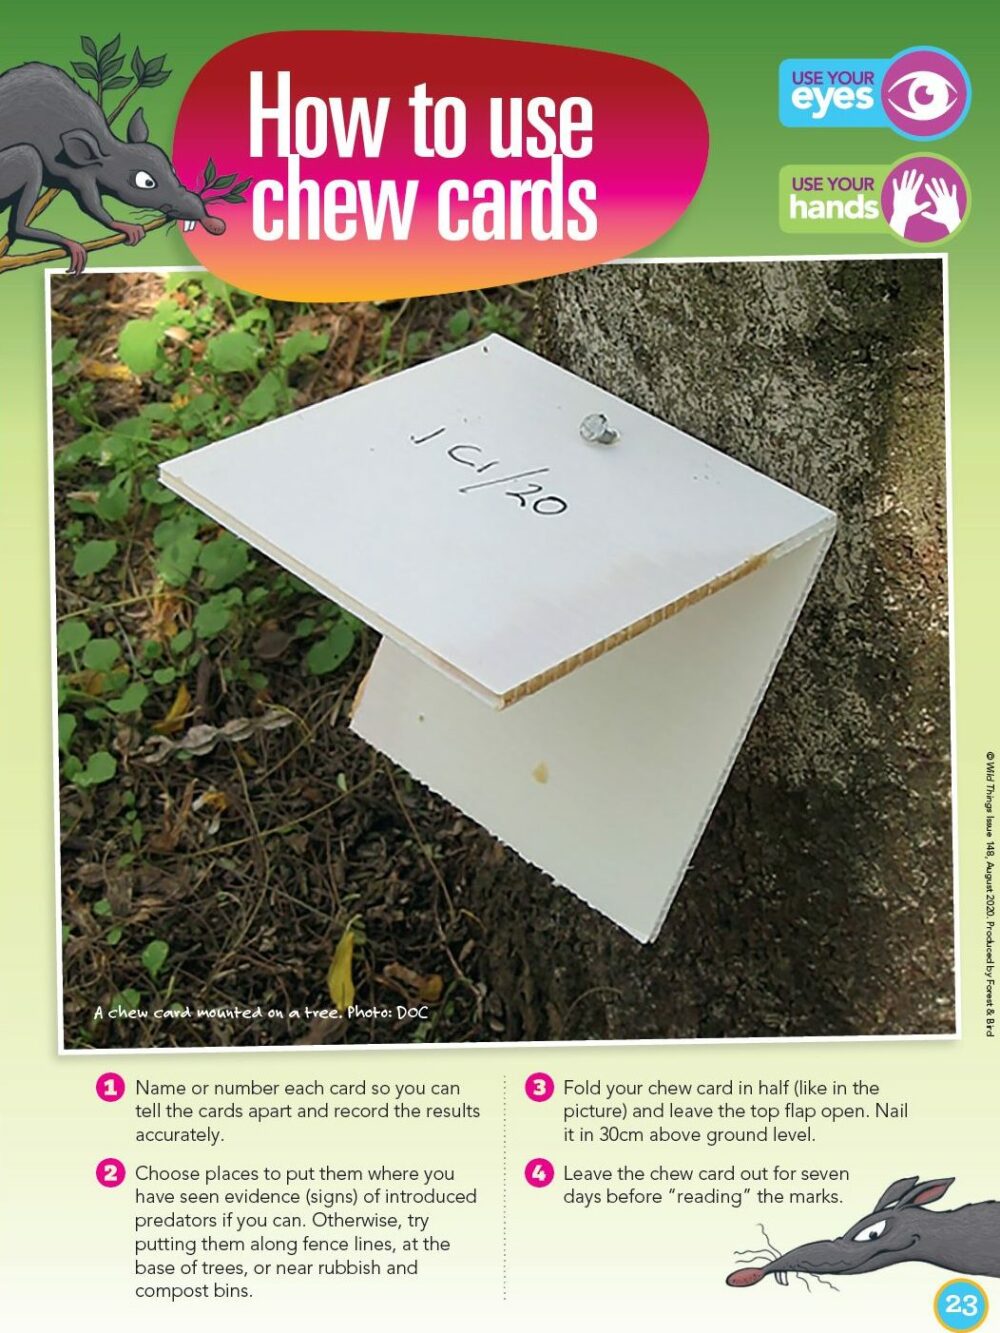 chew cards 1